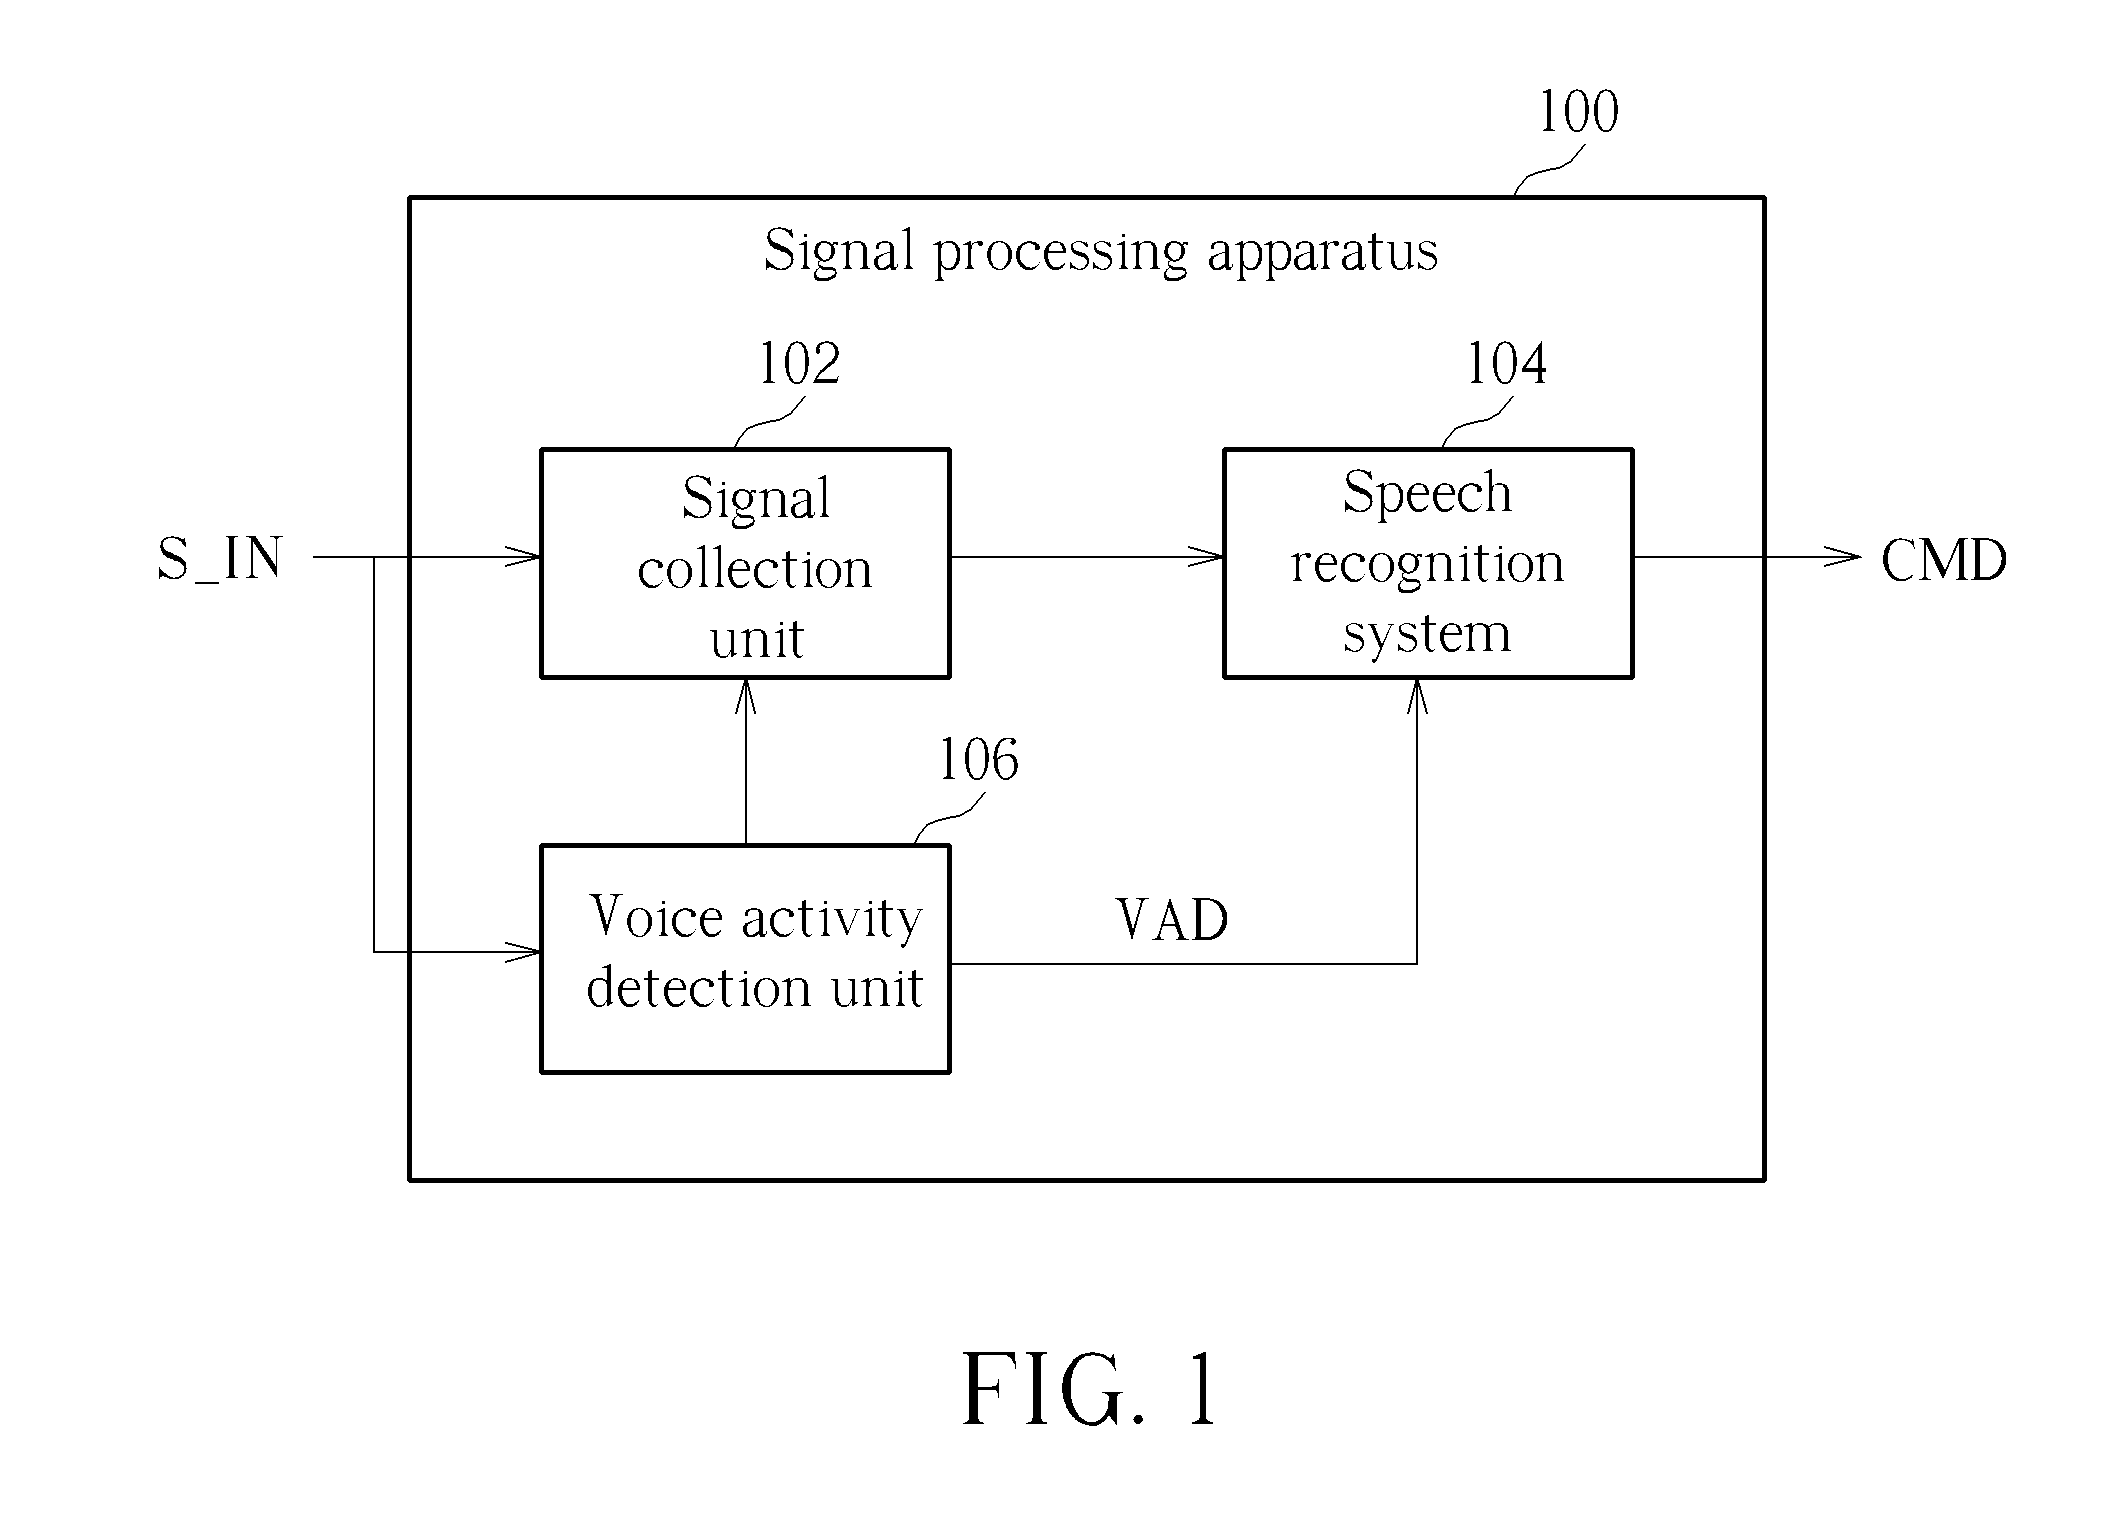 Signal processing apparatus having voice activity detection unit and related signal processing methods